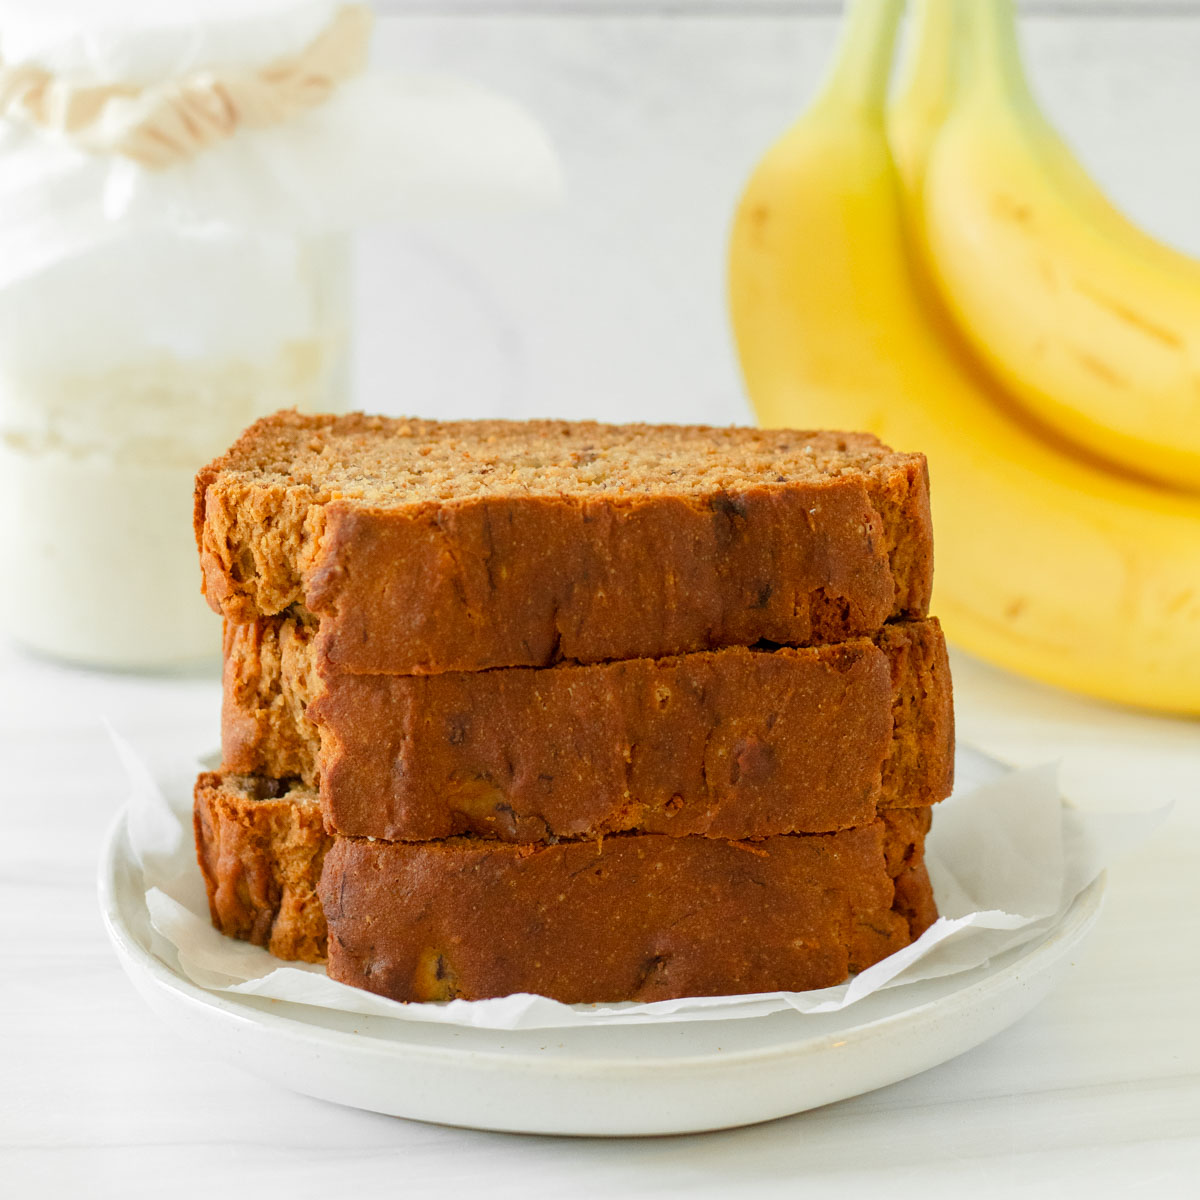 This gluten-free sourdough banana bread is an easy gluten-free sourdough recipe made with simple ingredients and a gluten-free sourdough starter. This homemade banana bread is a delicious snack or quick breakfast recipe.